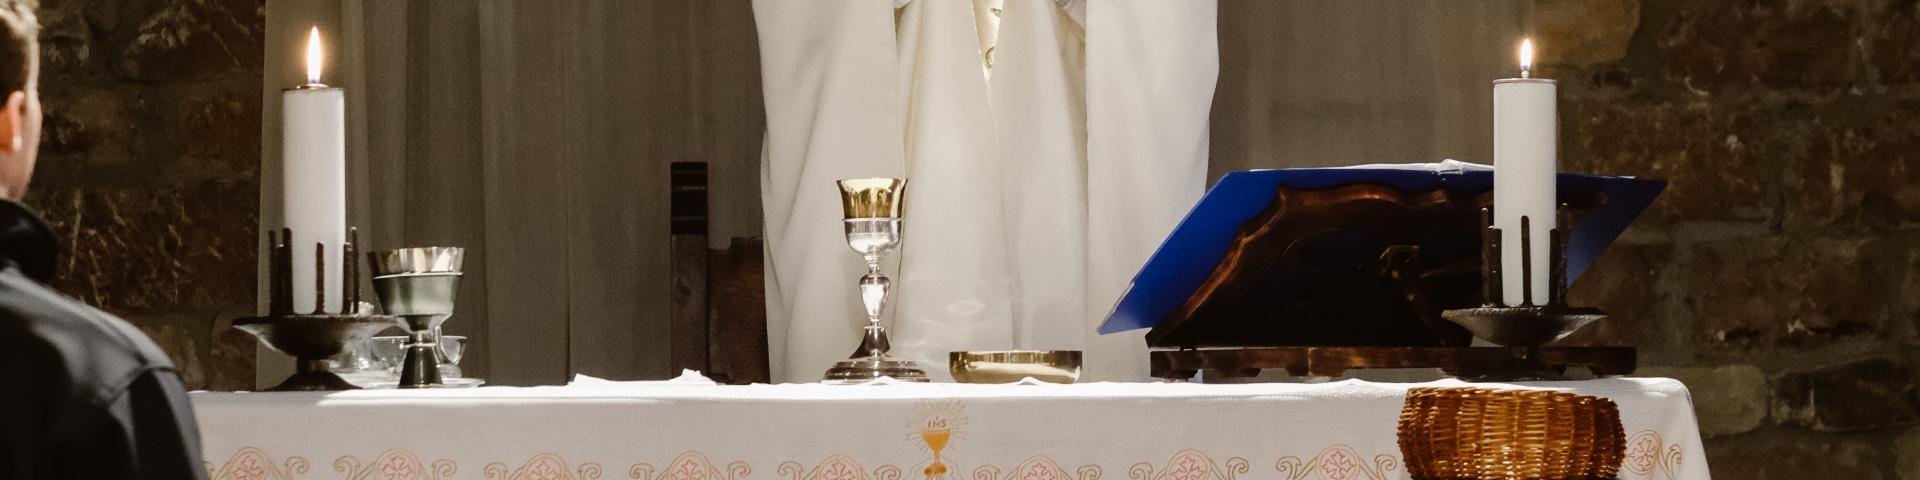 Priest holding up the Eucharist during consecration 